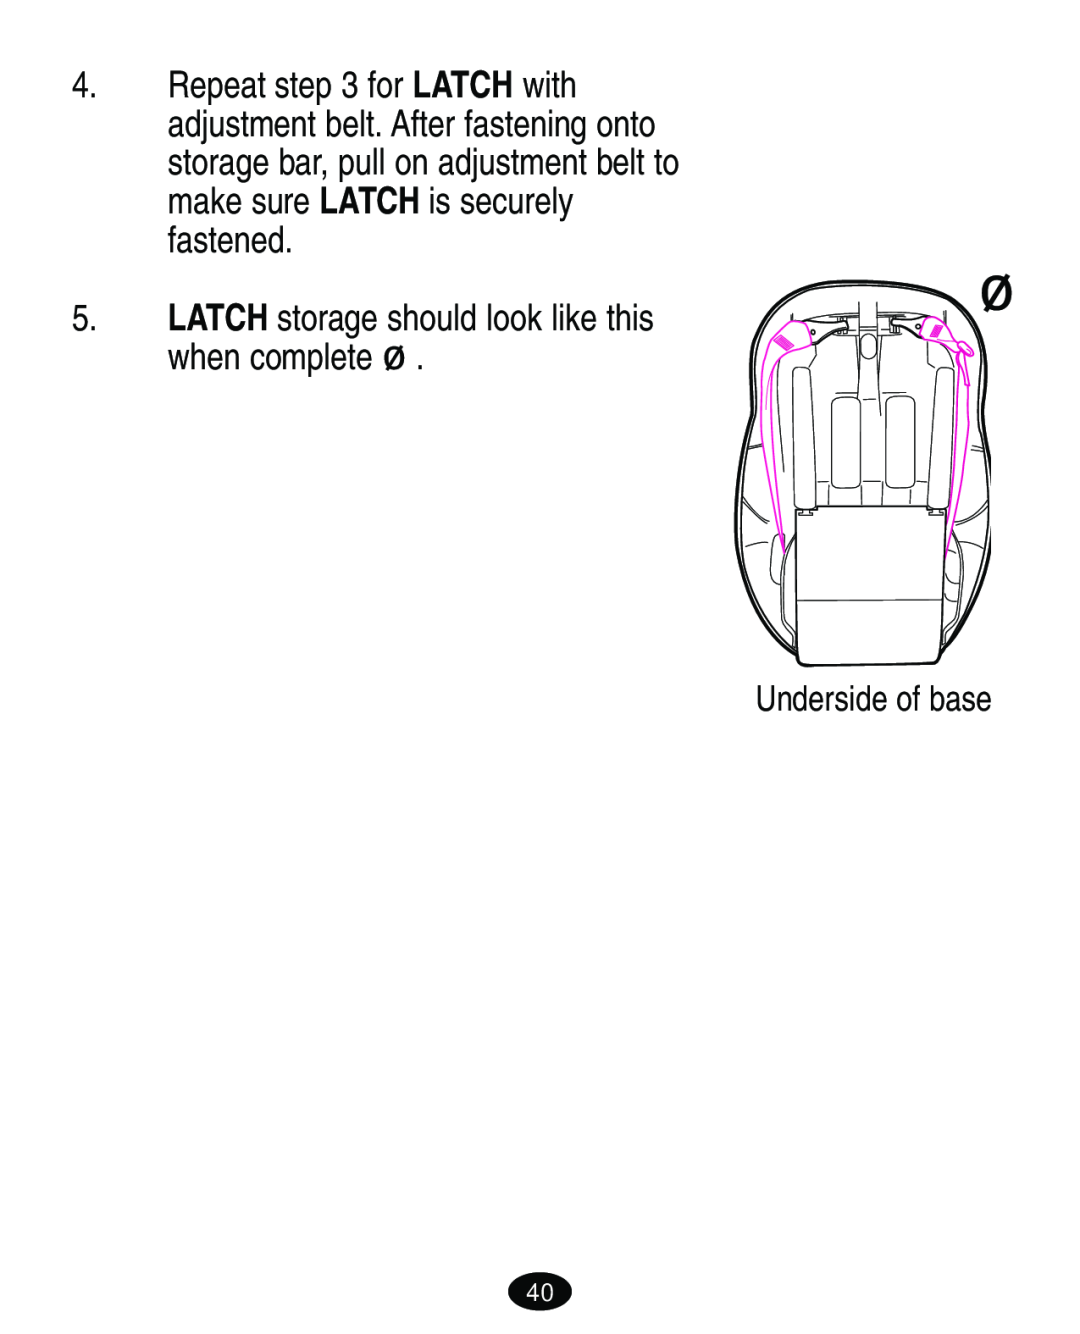 Graco 4460402 manual LATCH storage should look like this when complete ‹, Underside of base 